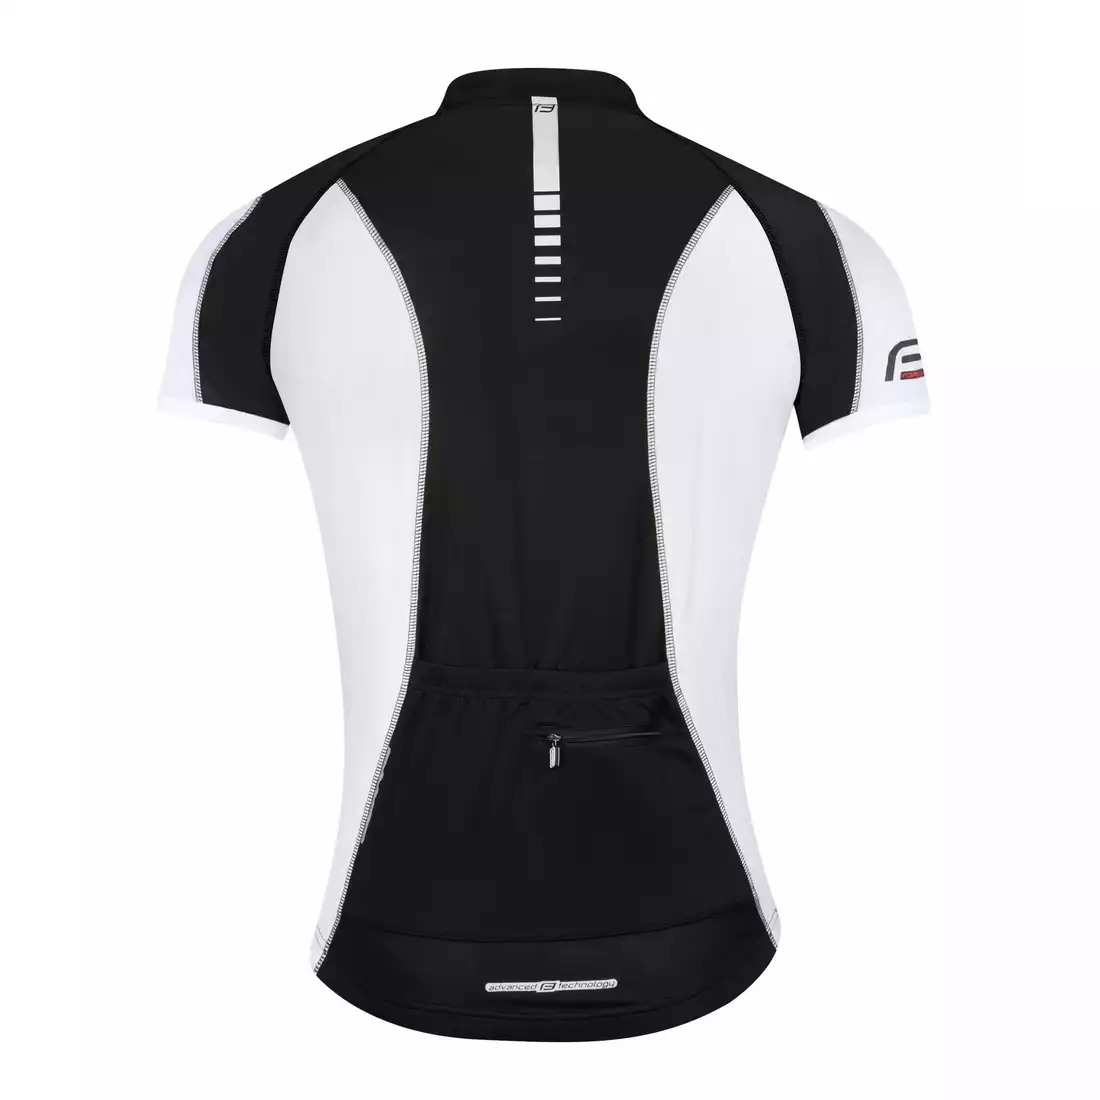 FORCE T12 Cycling jersey, black and white